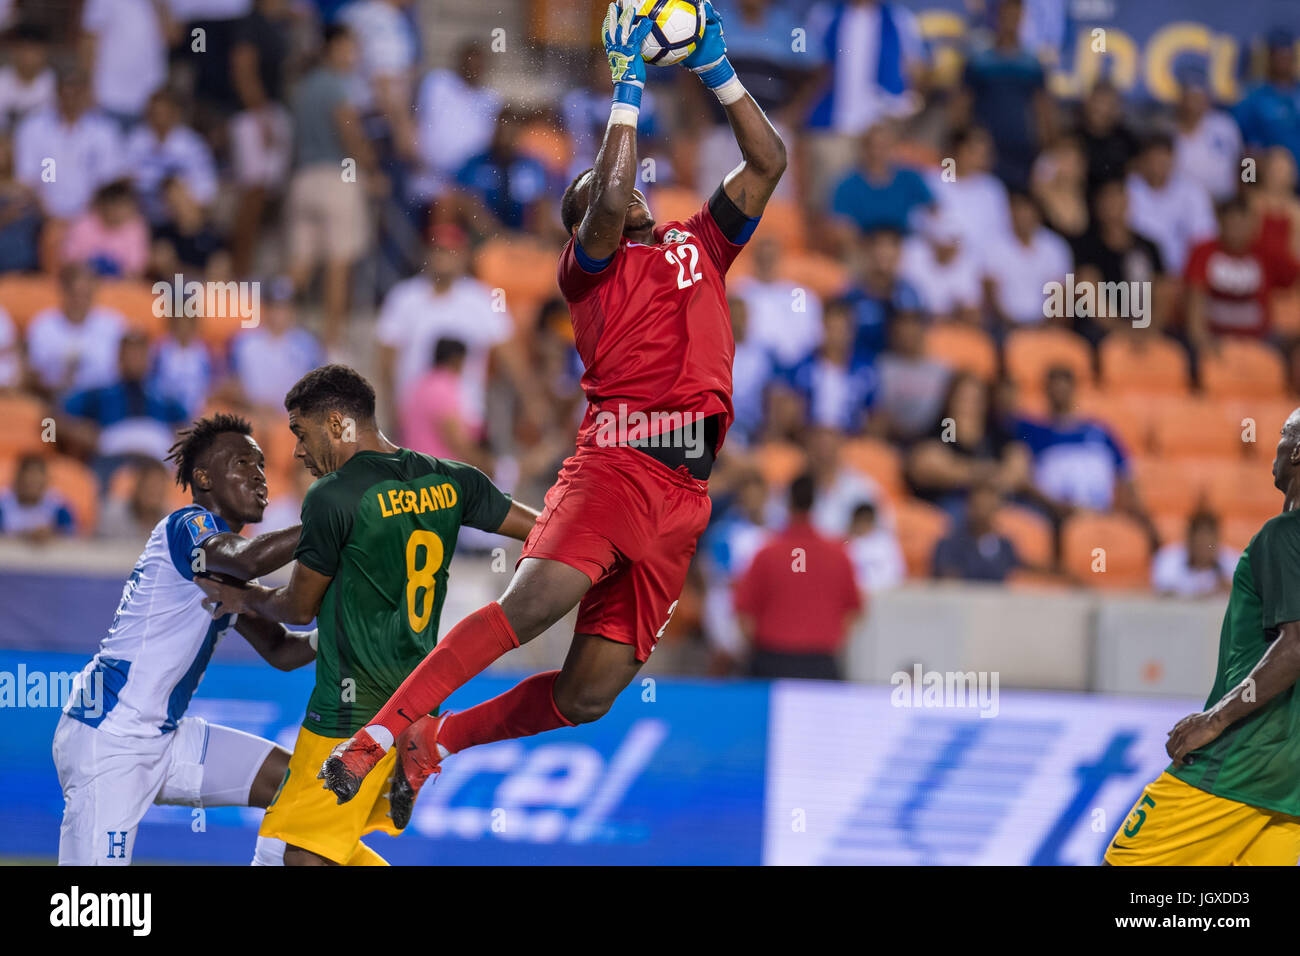 Houston, Texas, USA. 11th July, 2017. French Guiana goalkeeper Donovan Leon (22) grabs the ball during the 2nd half of an international CONCACAF Gold Cup soccer match between Honduras and French Guiana at BBVA Compass Stadium in Houston, TX on July 11th, 2017. The game ended in a 0-0 draw. Credit: Trask Smith/ZUMA Wire/Alamy Live News Stock Photo